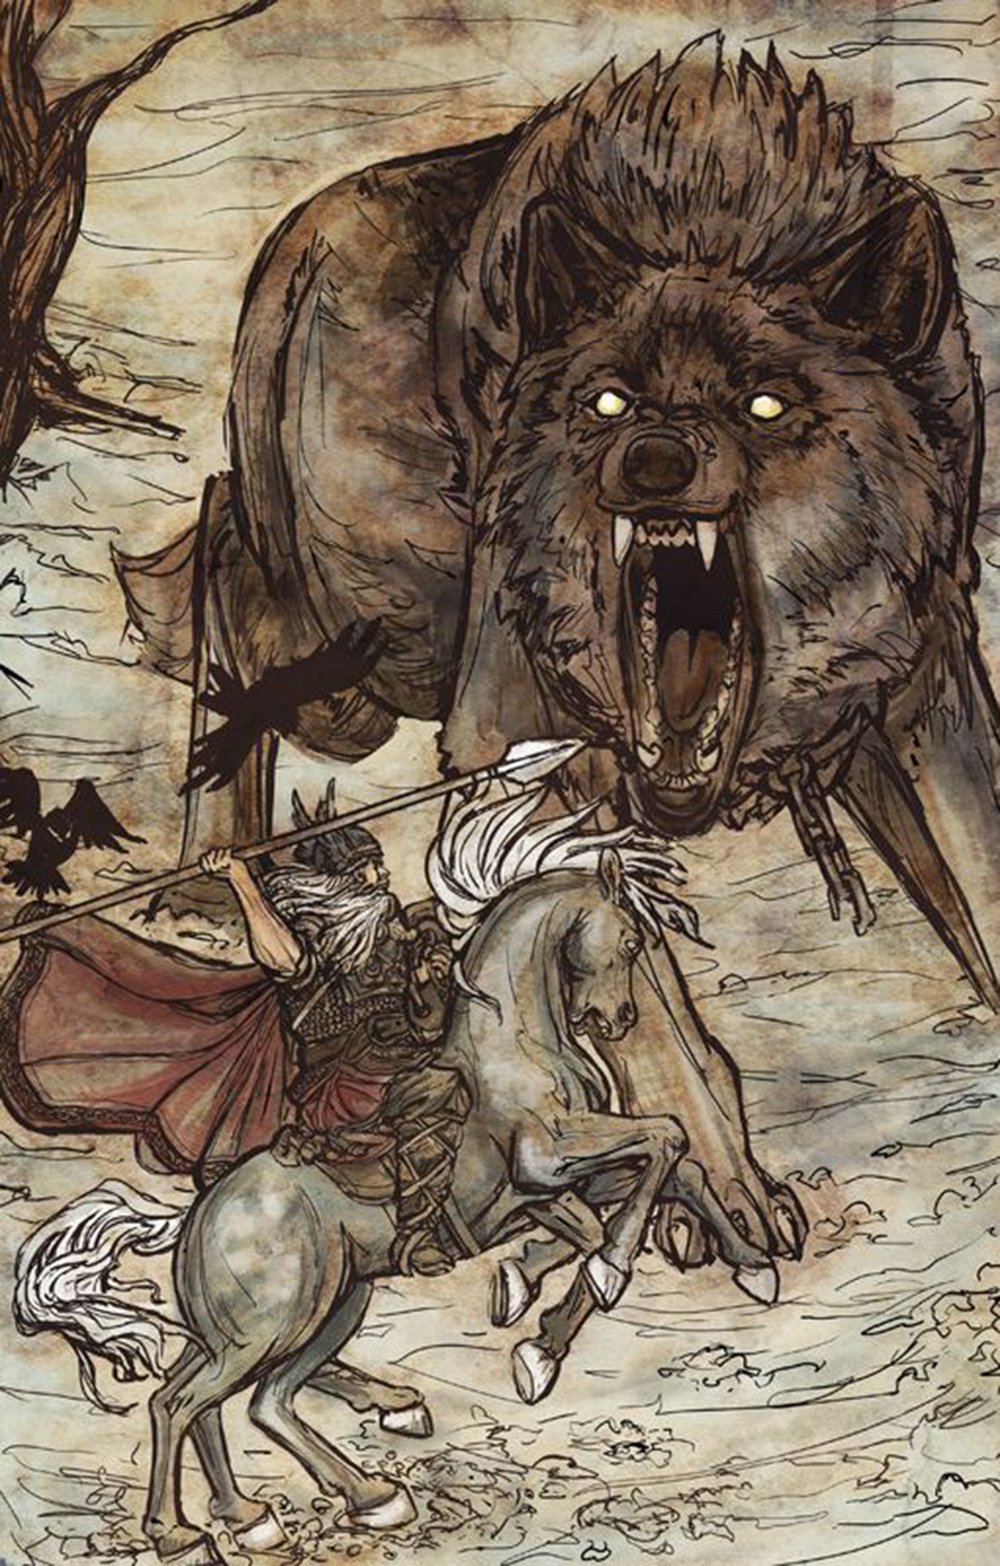 An illustration of a man, the god Odin from Norse mythology, on horseback fighting a giant wolf, Fenrir. The man is wearing a red cape and a helmet with a plume. He is holding a spear in his right hand. The horse is white and is rearing up on its hind legs. The wolf is black and is snarling with its mouth open. It has yellow eyes. The background is a forest with trees and a cloudy sky. The illustration is done in a sketchy style with a lot of cross-hatching and shading.